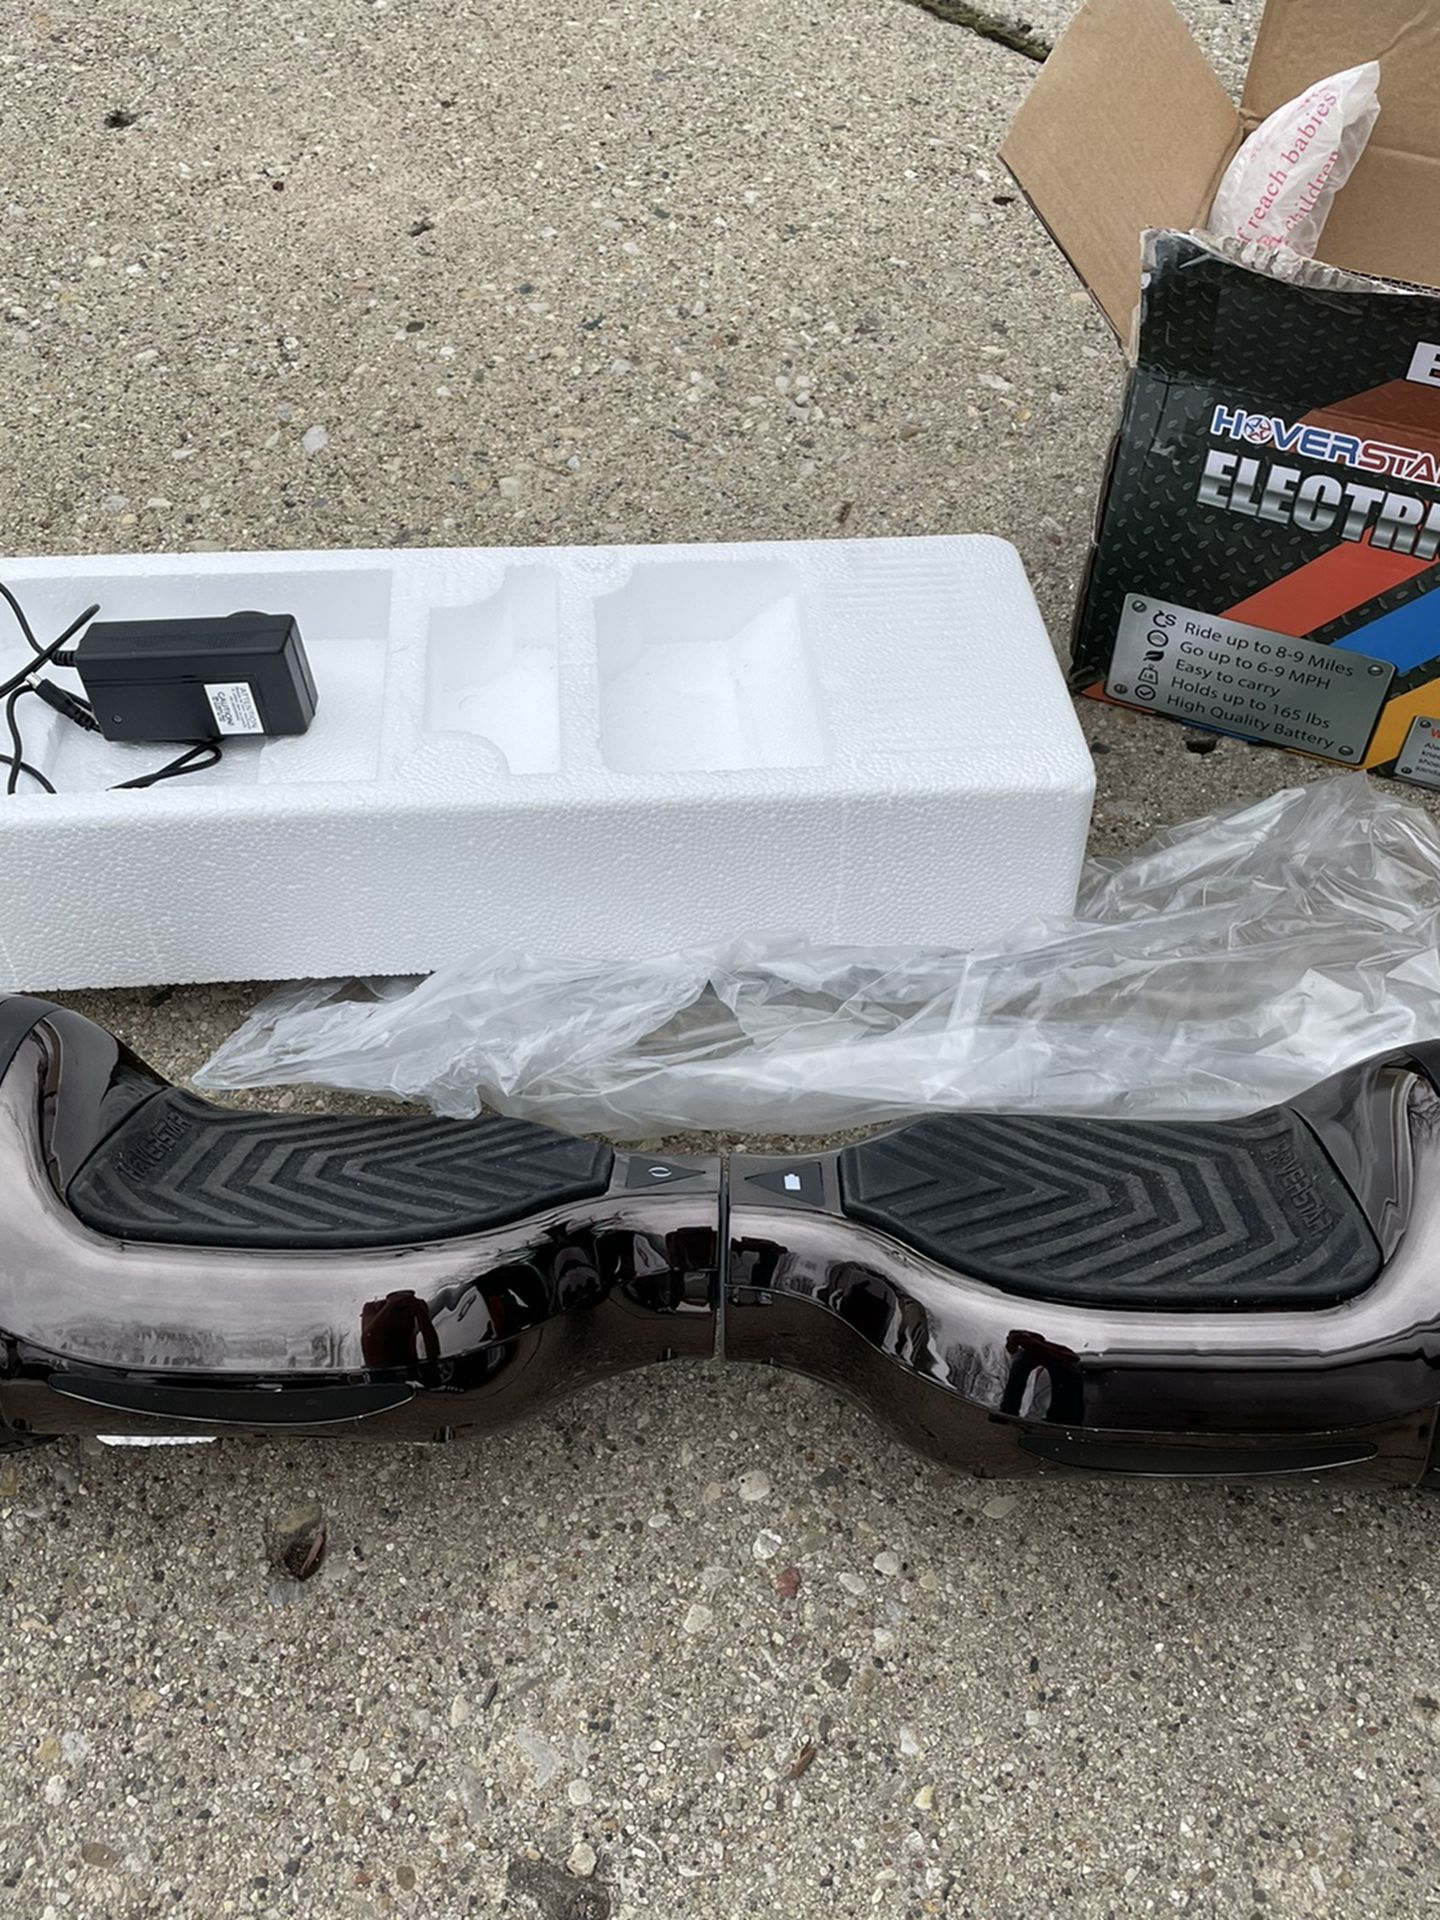 Hoverboard 250$ Plus 3 Years Warranty